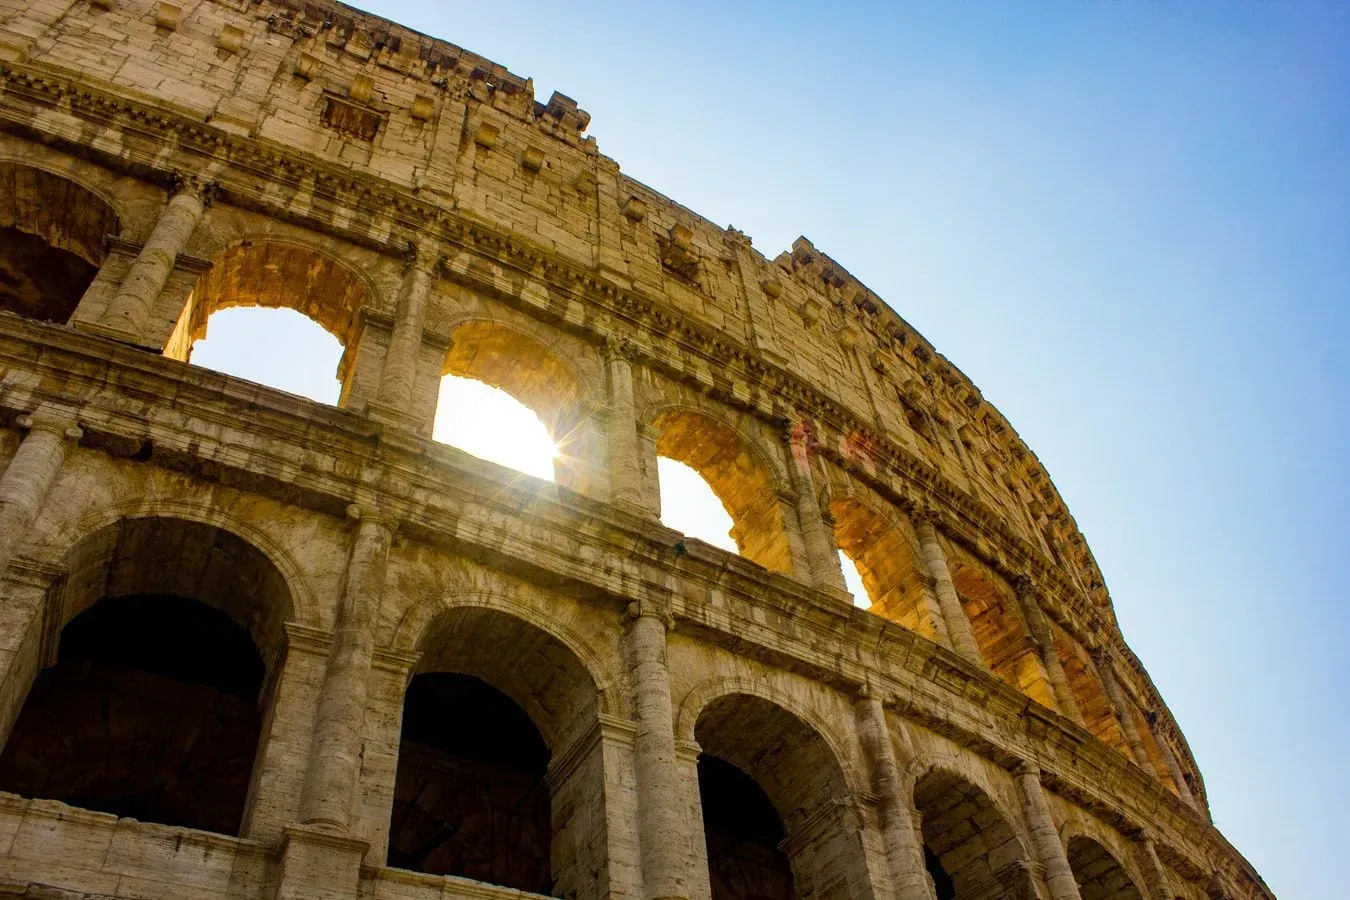 The Colosseum often meant life or death for many gladiators.